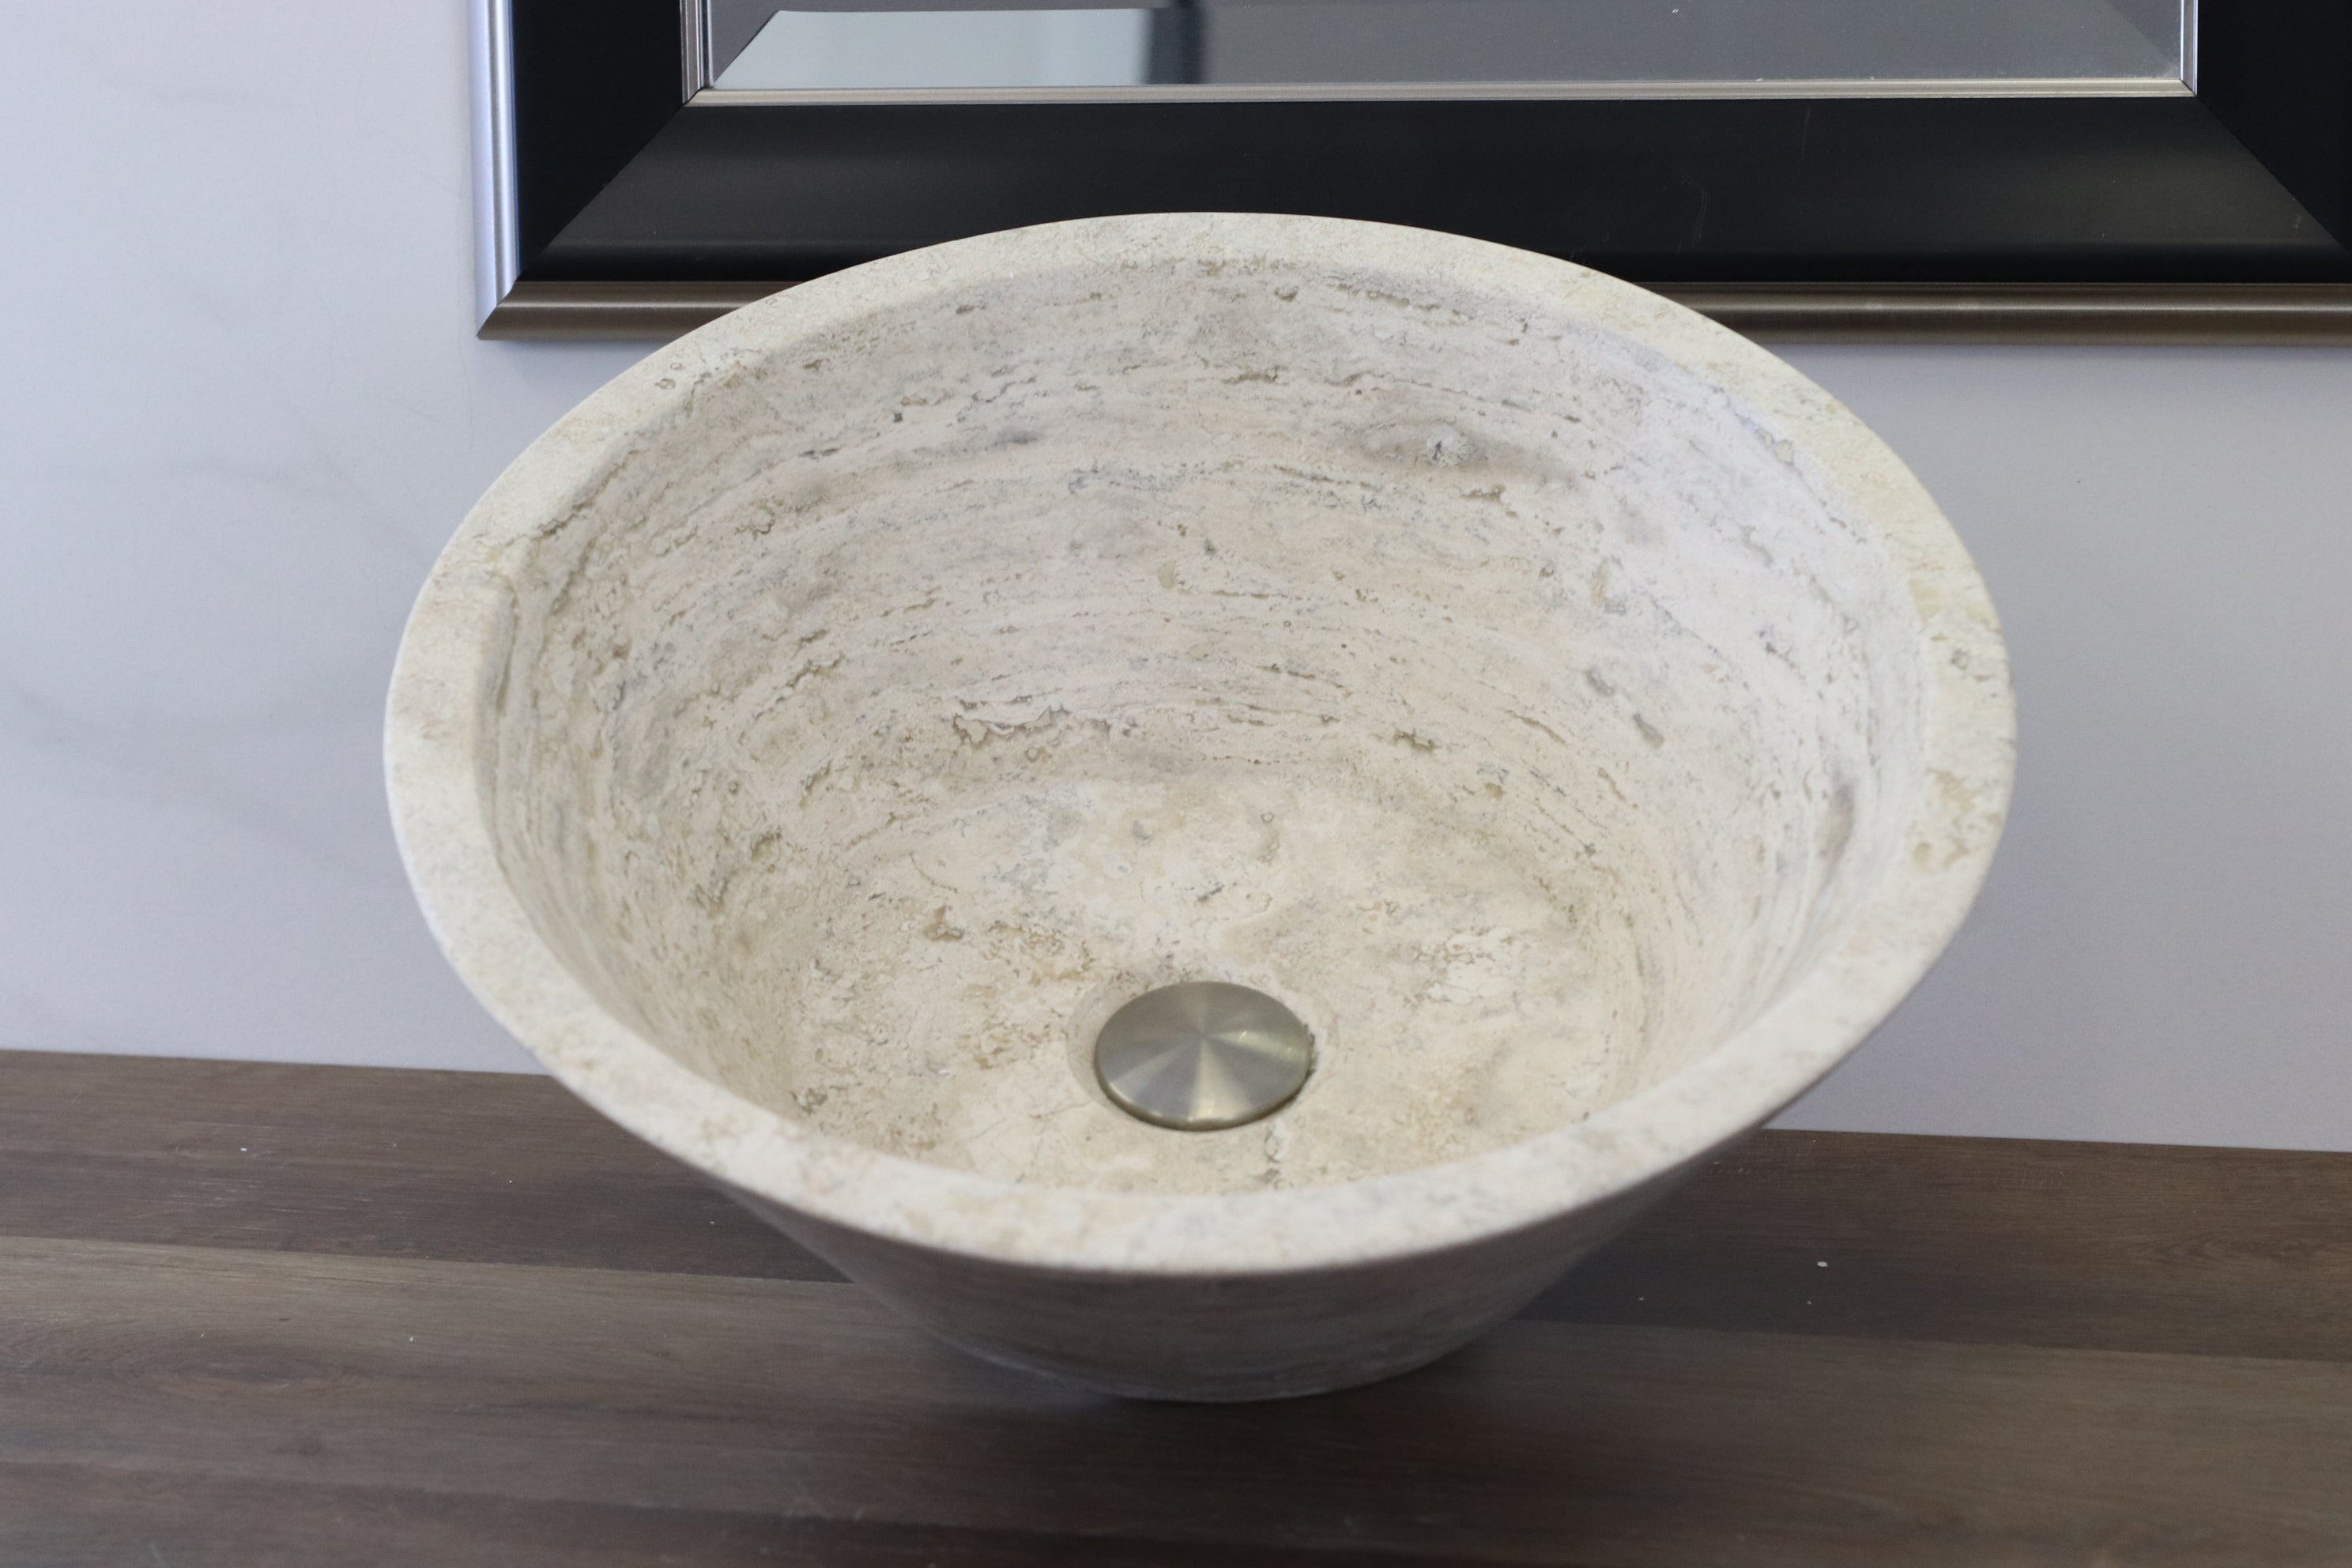 White Round Travertine Stone Vessel Above Counter Sink. Handmade in Mexico. Hand finished and ships from the USA. Buy now at www.felipeandgrace.com. 